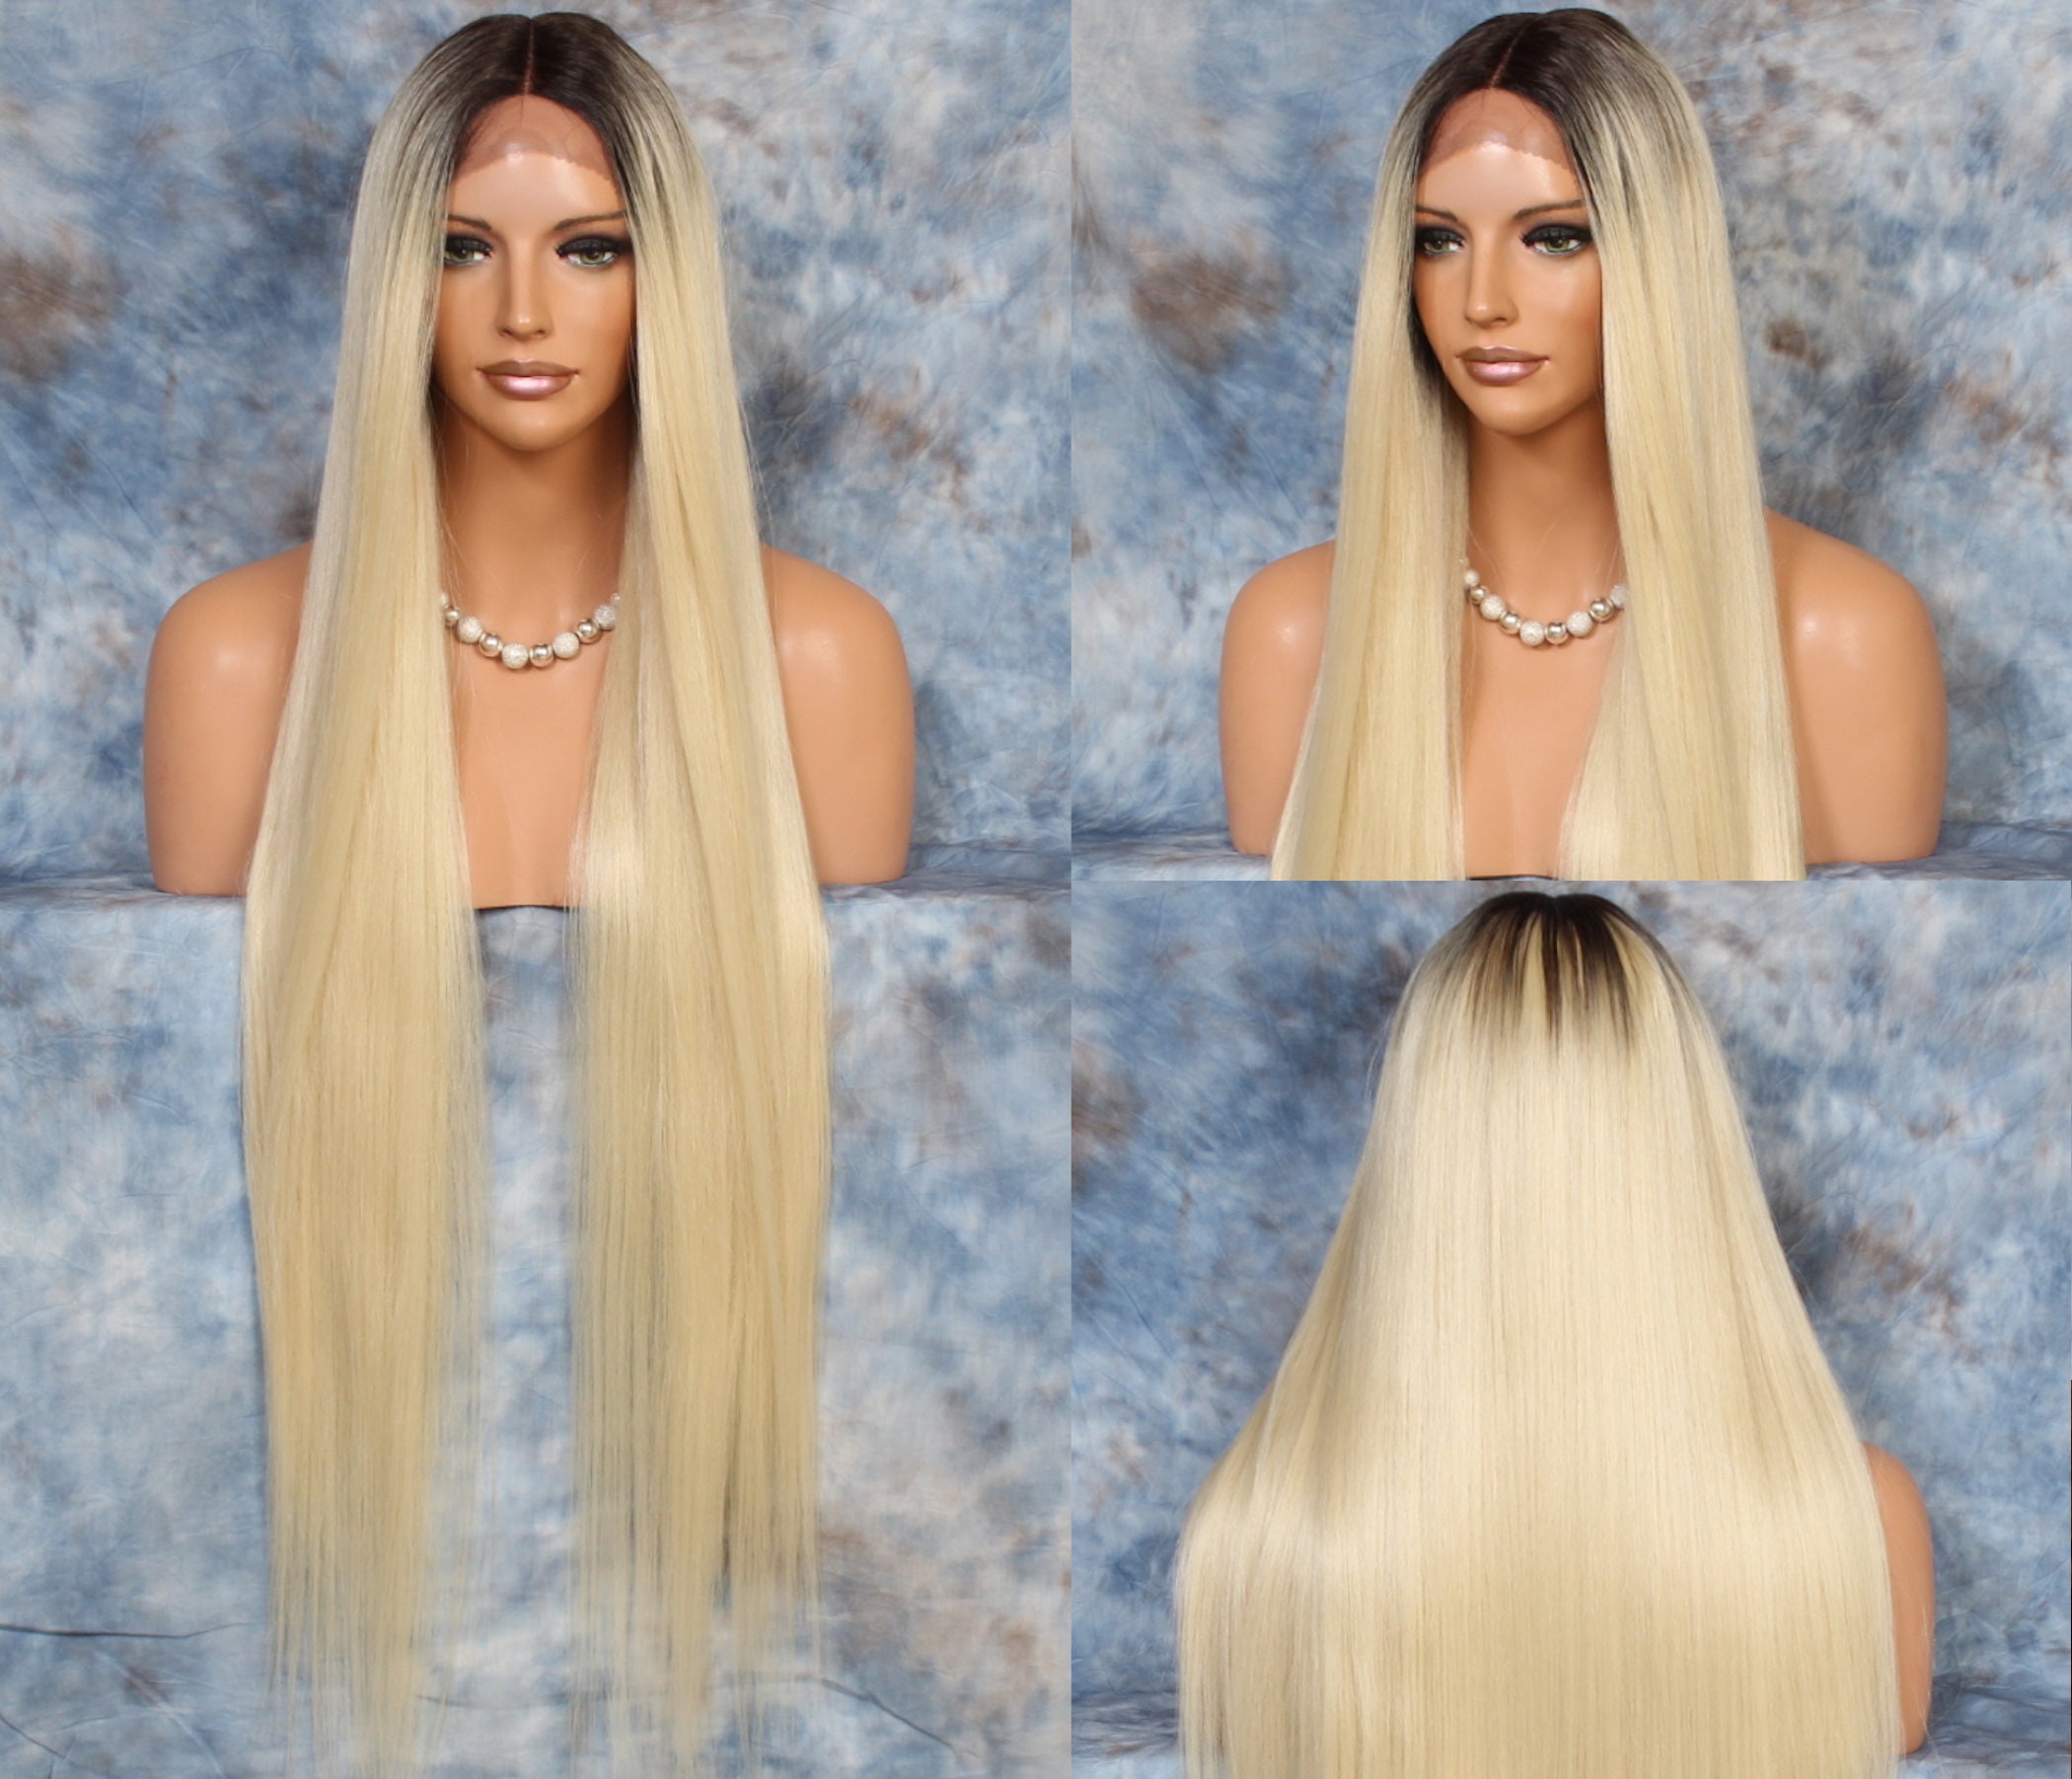 45 Human Hair Blend Lace Front Wig Hand Tied Center Part Straight Heat Safe Blonde Dark Roots Cancer/Alopecia/Cosplay